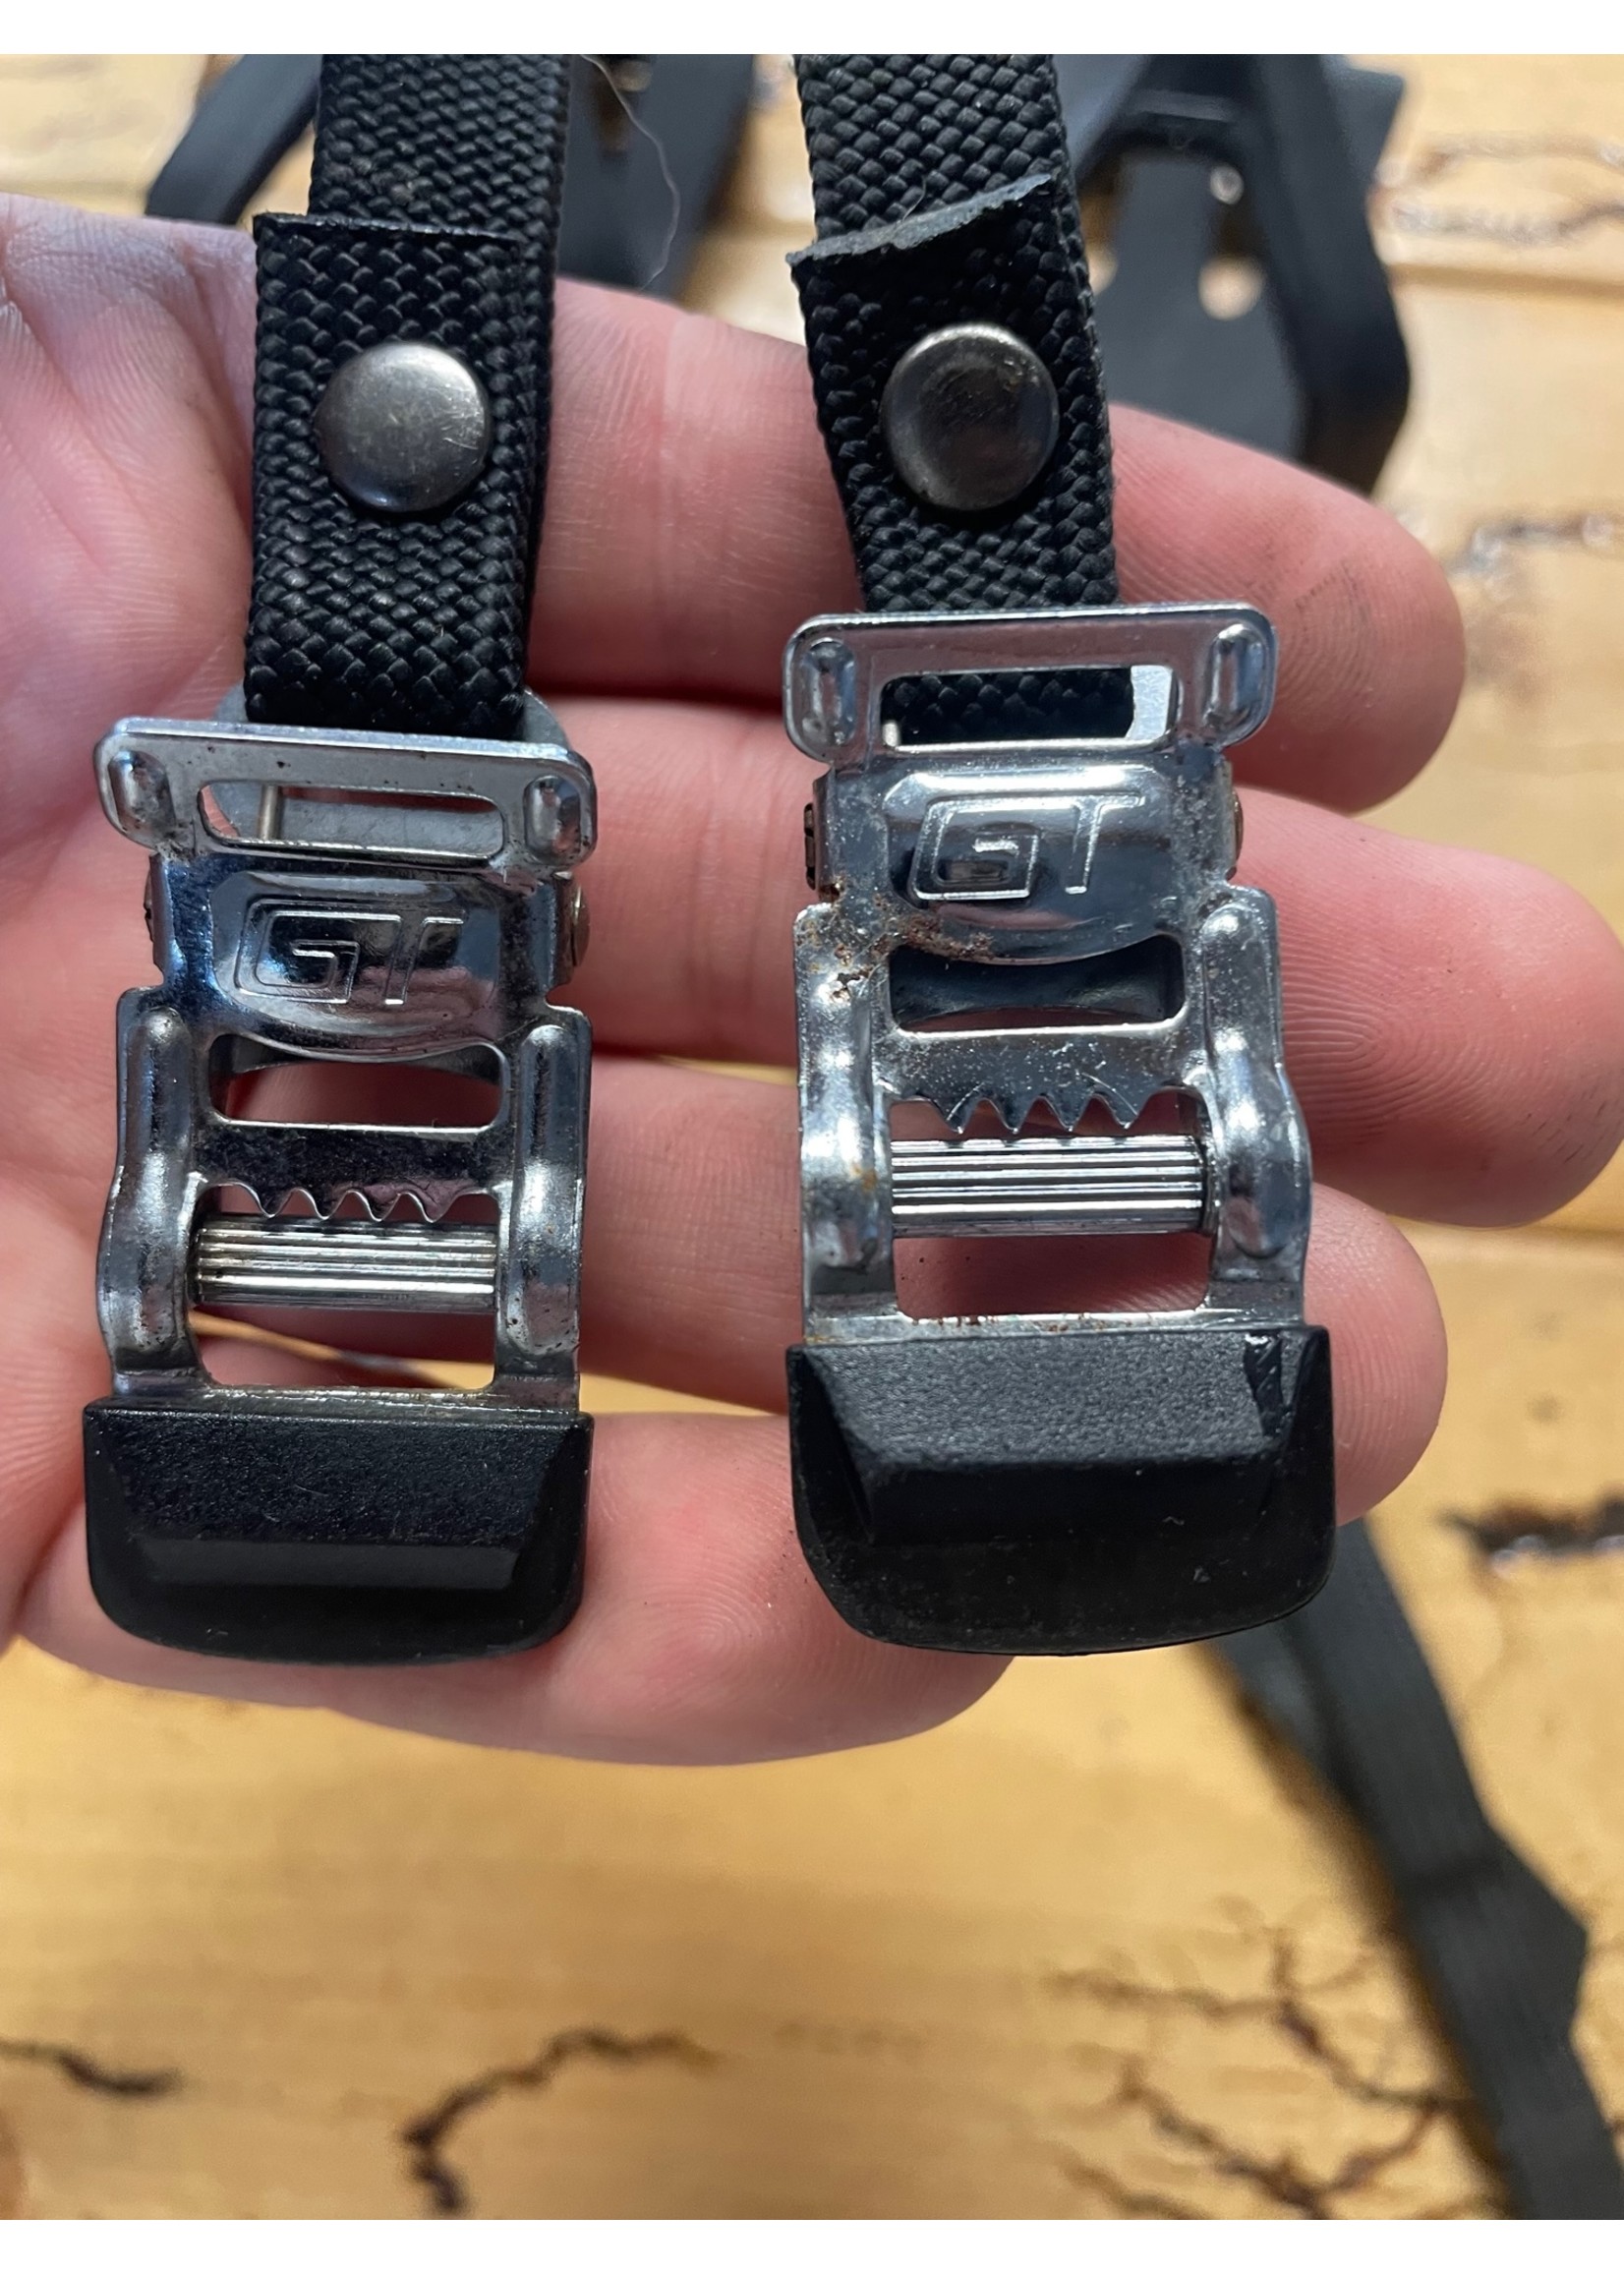 GT GT Pedal Cages and Toe Straps